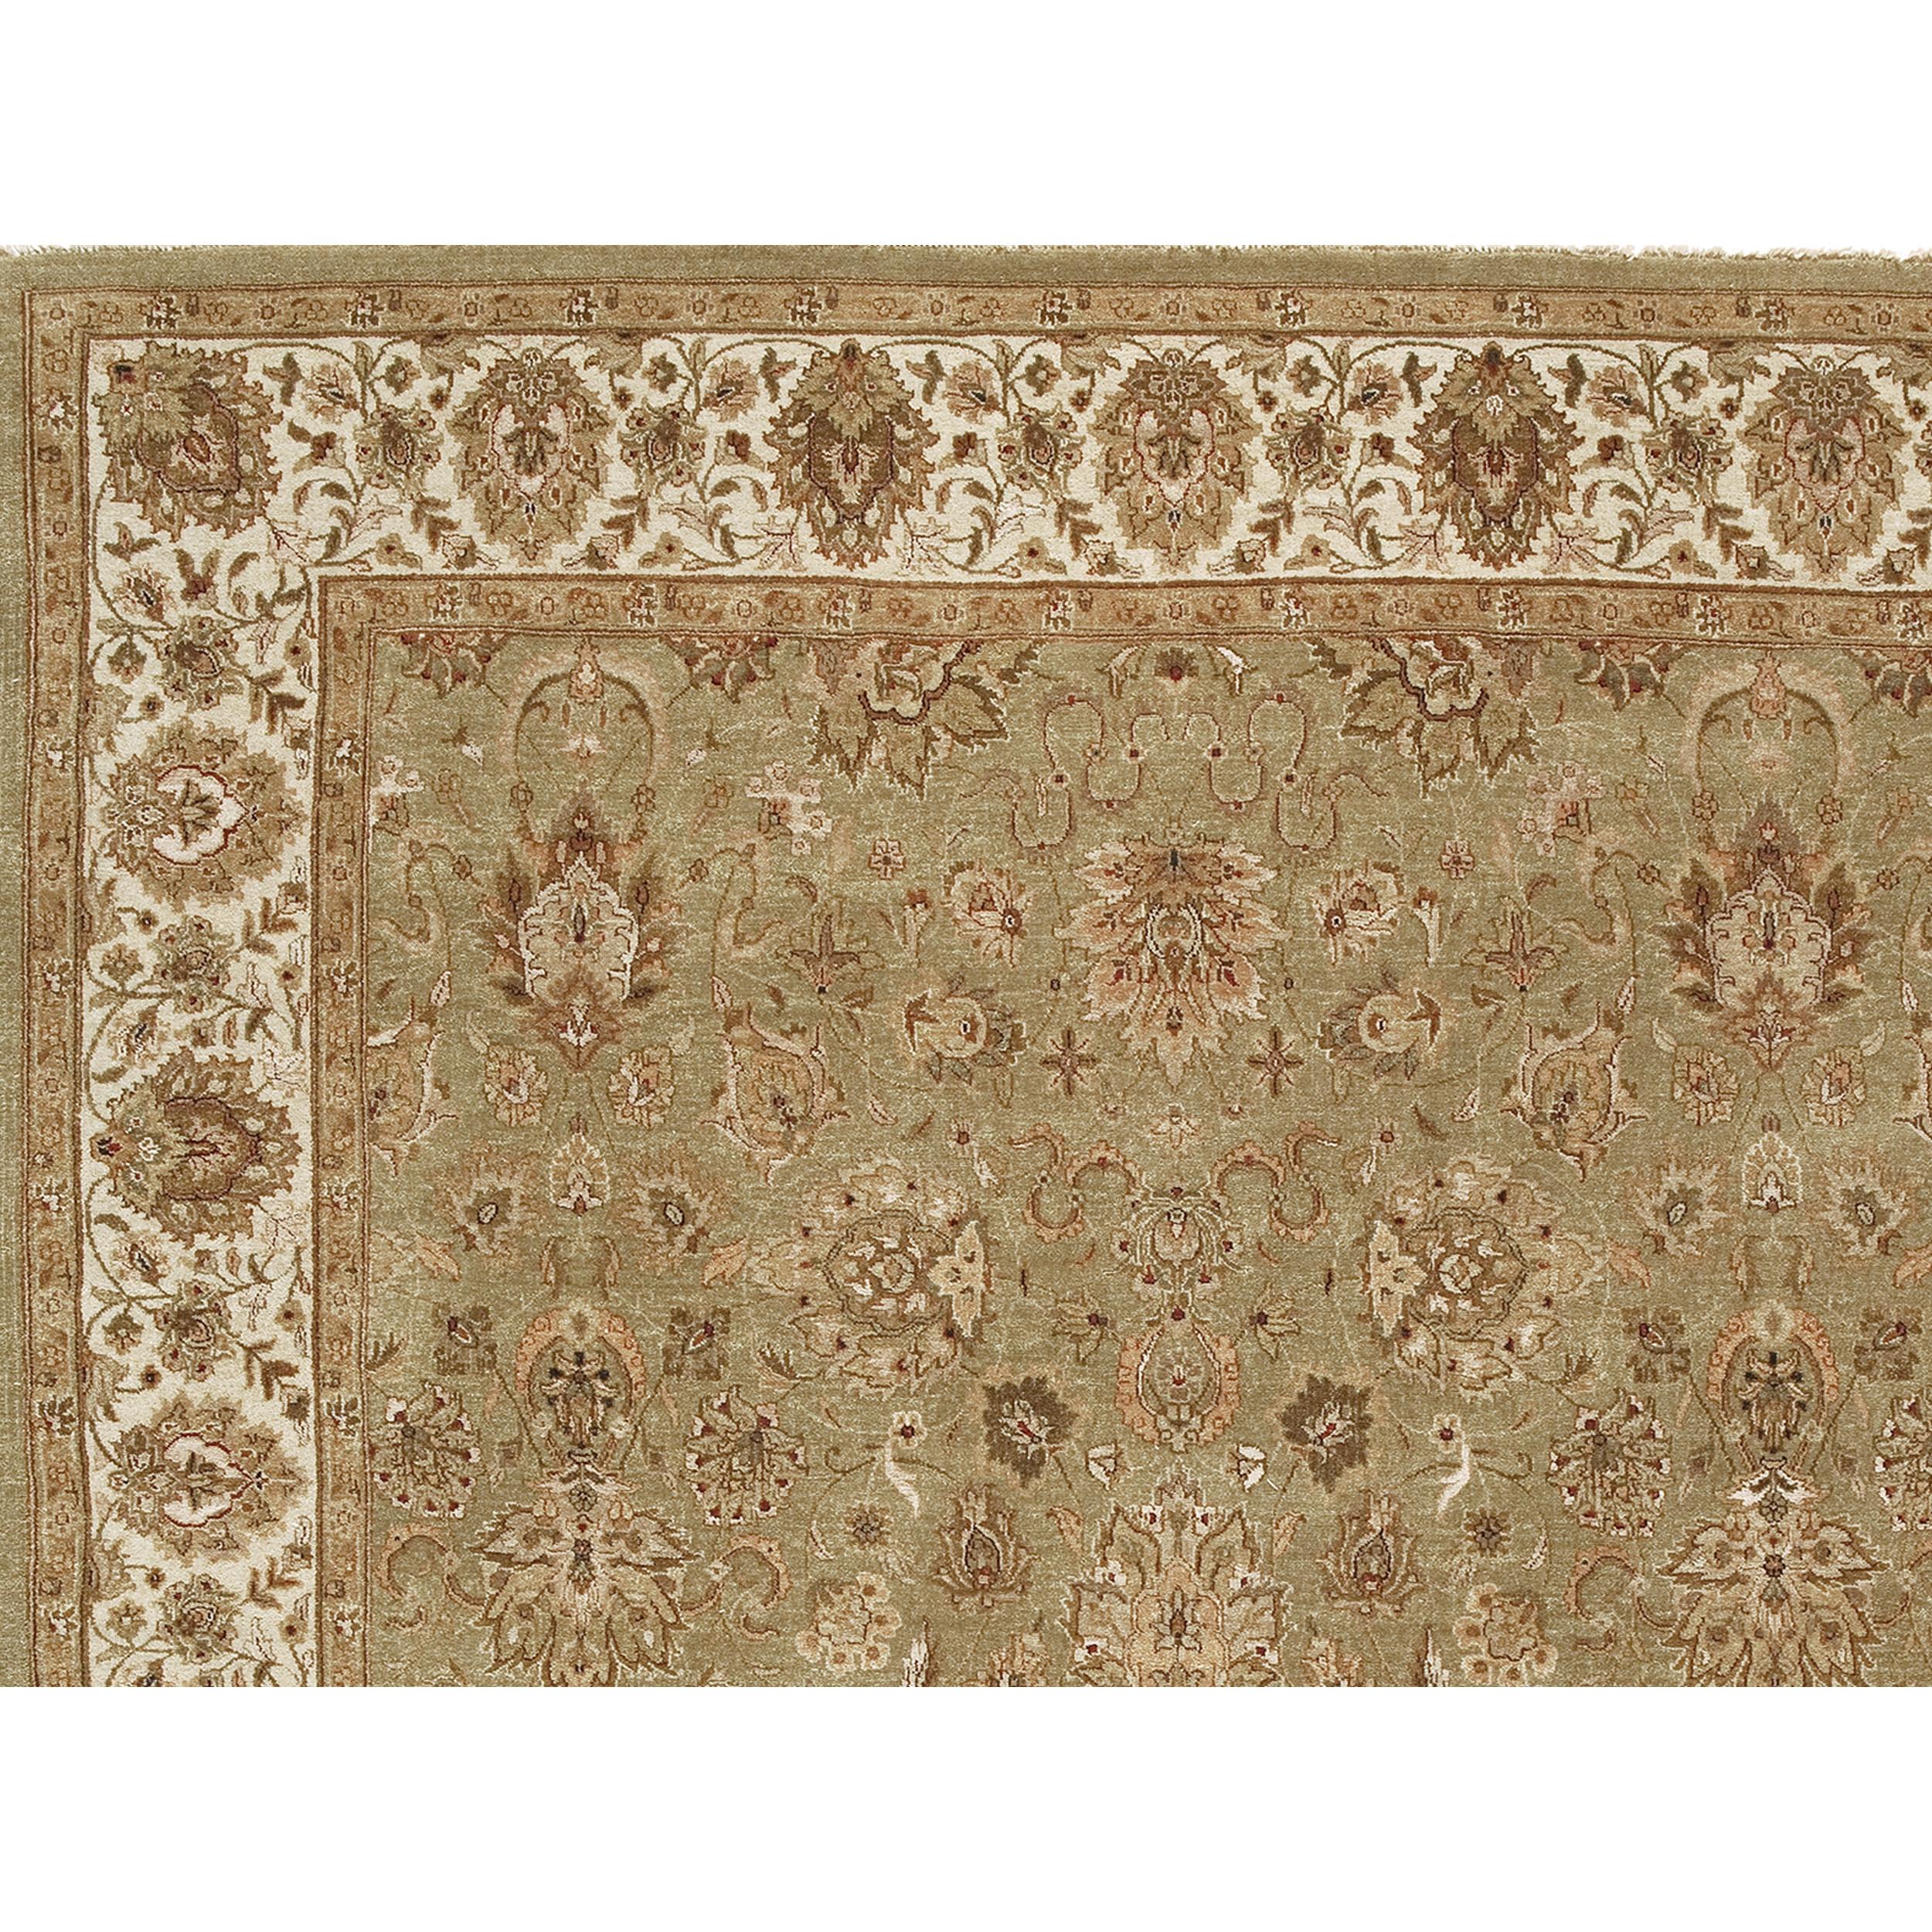 Every inch of this rug is meticulously hand-knotted by skilled artisans in India. The design reflects a traditional timeless aesthetic. Crafted from a harmonious blend of silk and sumptuous wool made up of yarn that is brilliantly colored using